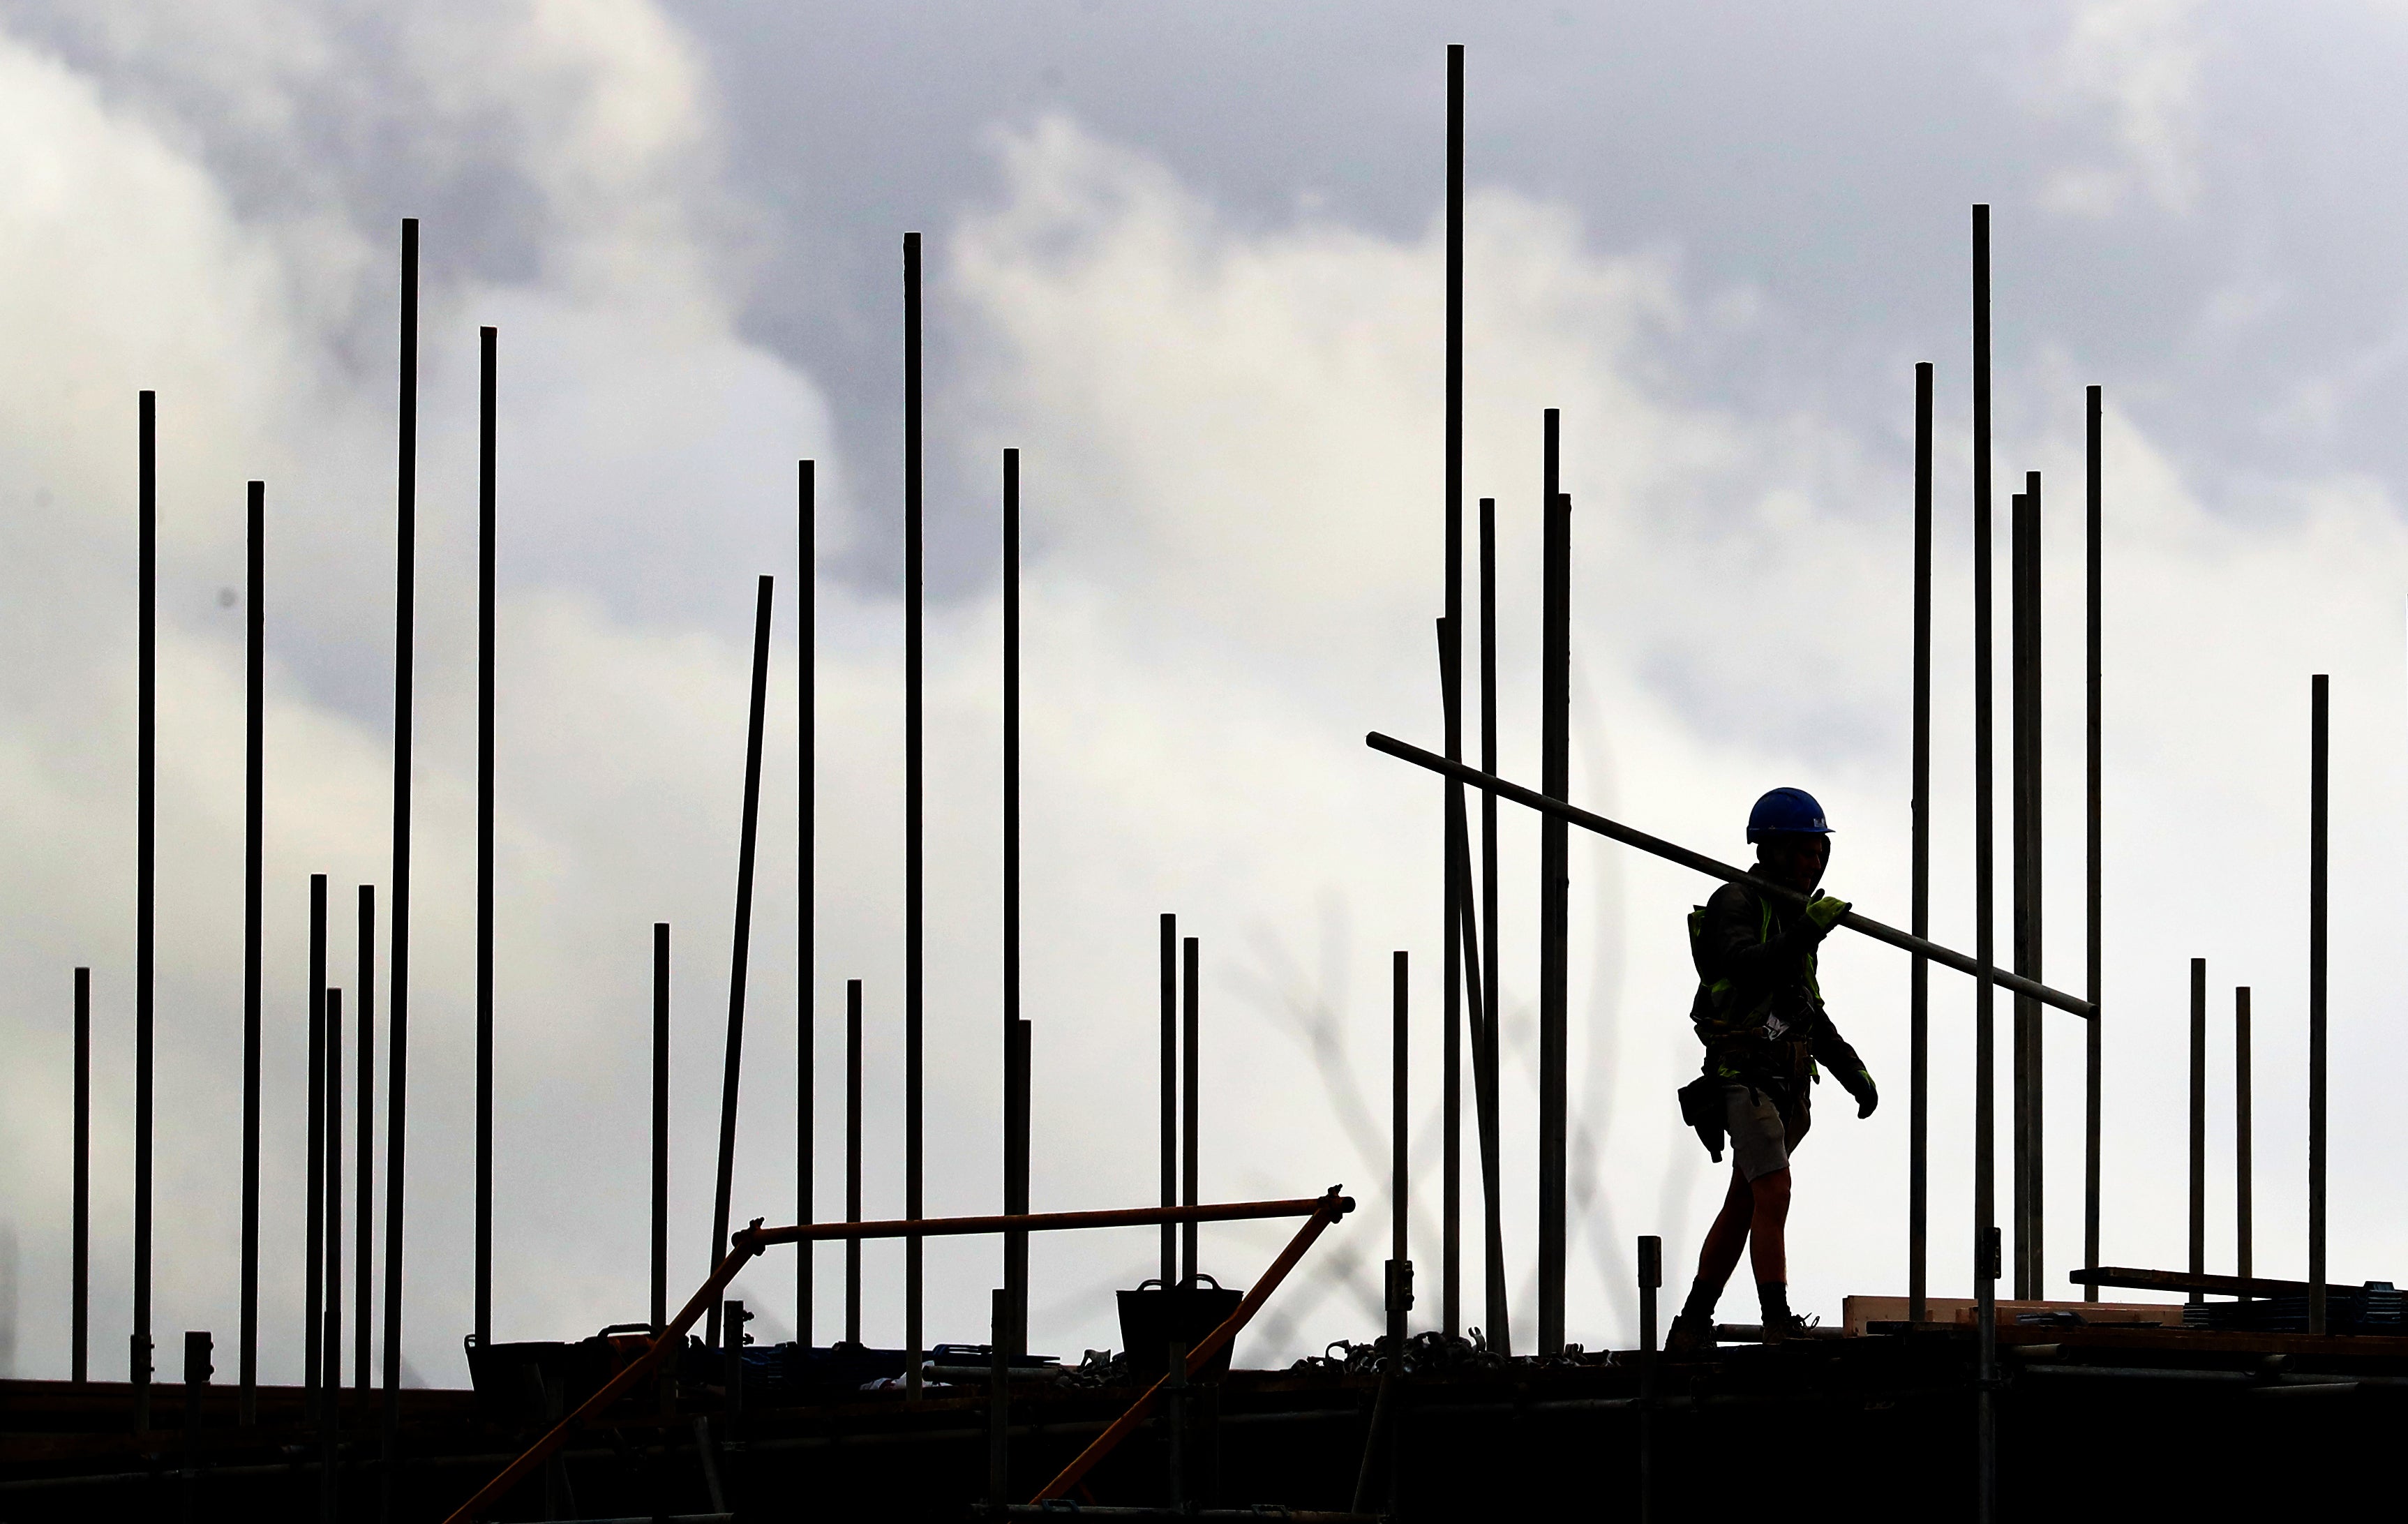 Government efforts to build more affordable homes could be more ambitious in helping to achieve wider aims, such as net zero commitments, according to the National Audit Office (Gareth Fuller/PA)